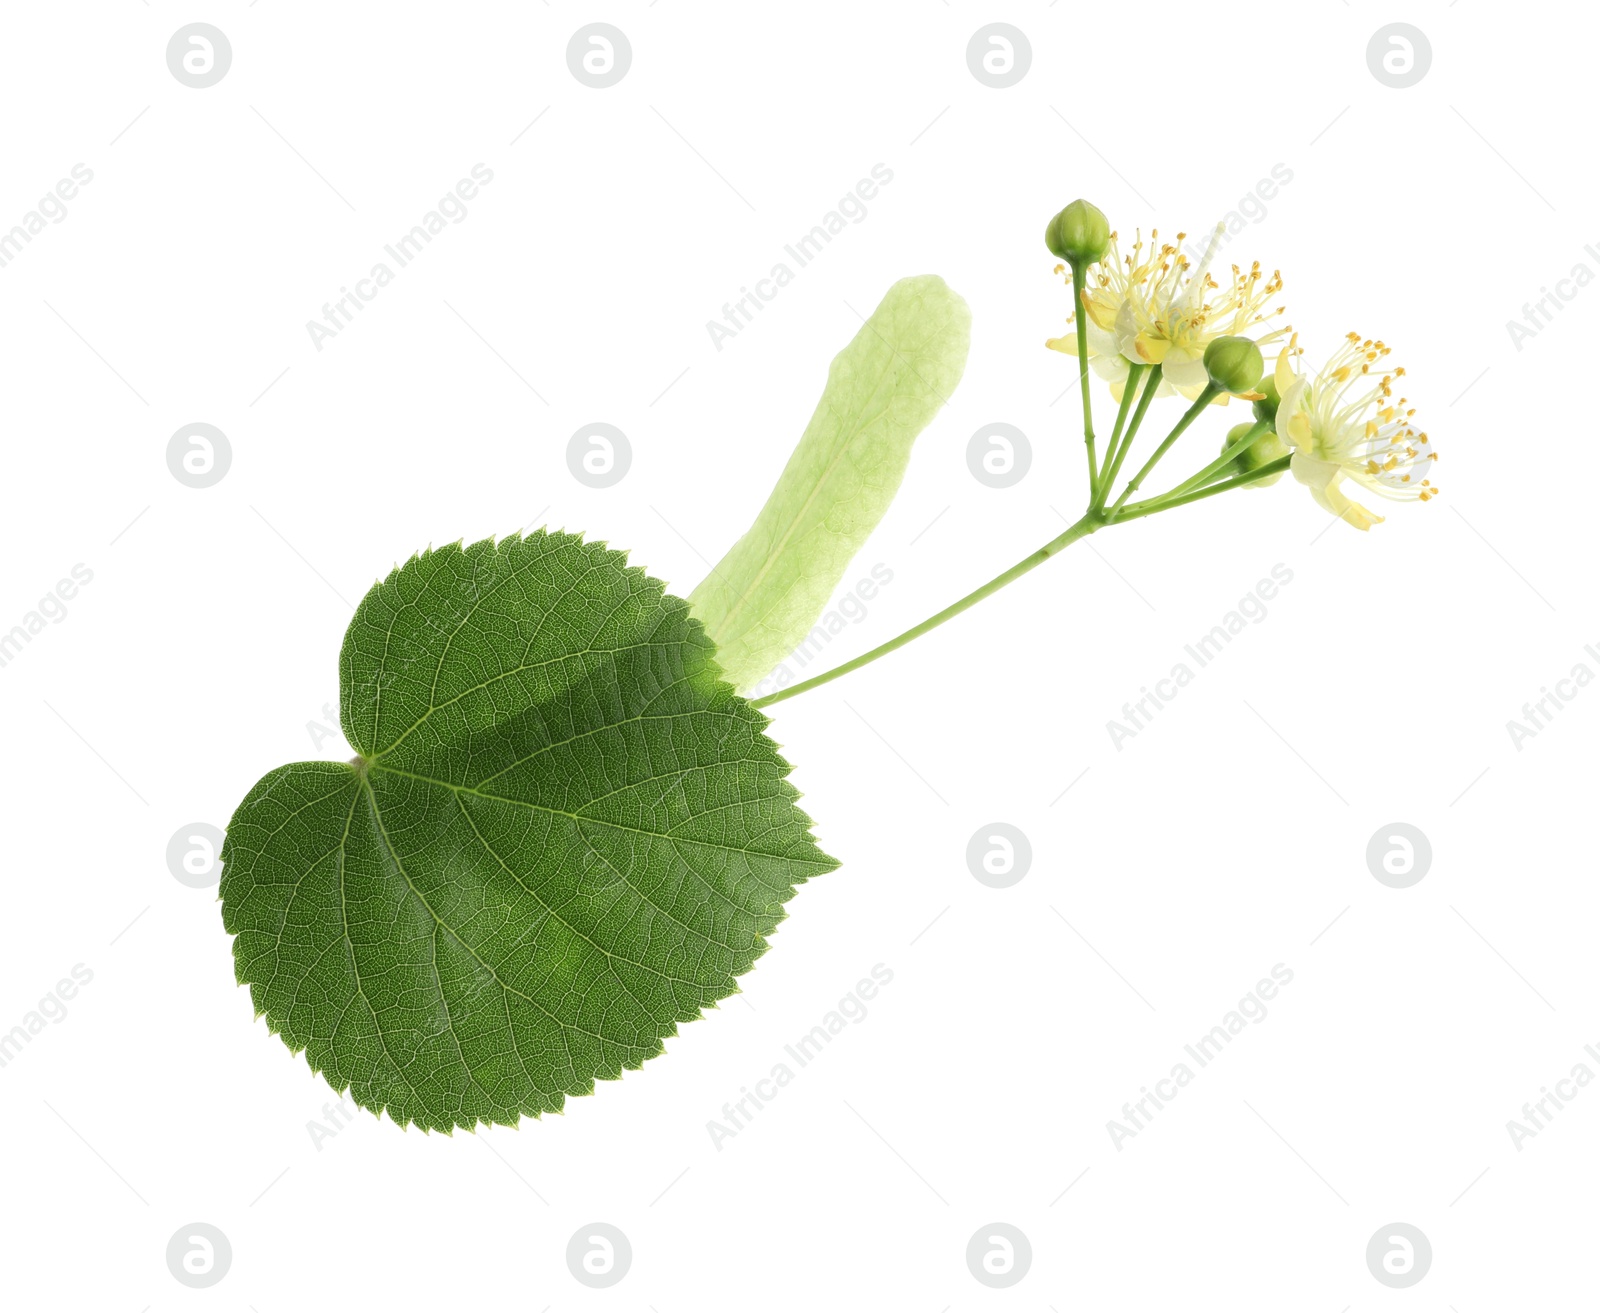 Photo of Beautiful linden tree blossom with young fresh green leaf isolated on white